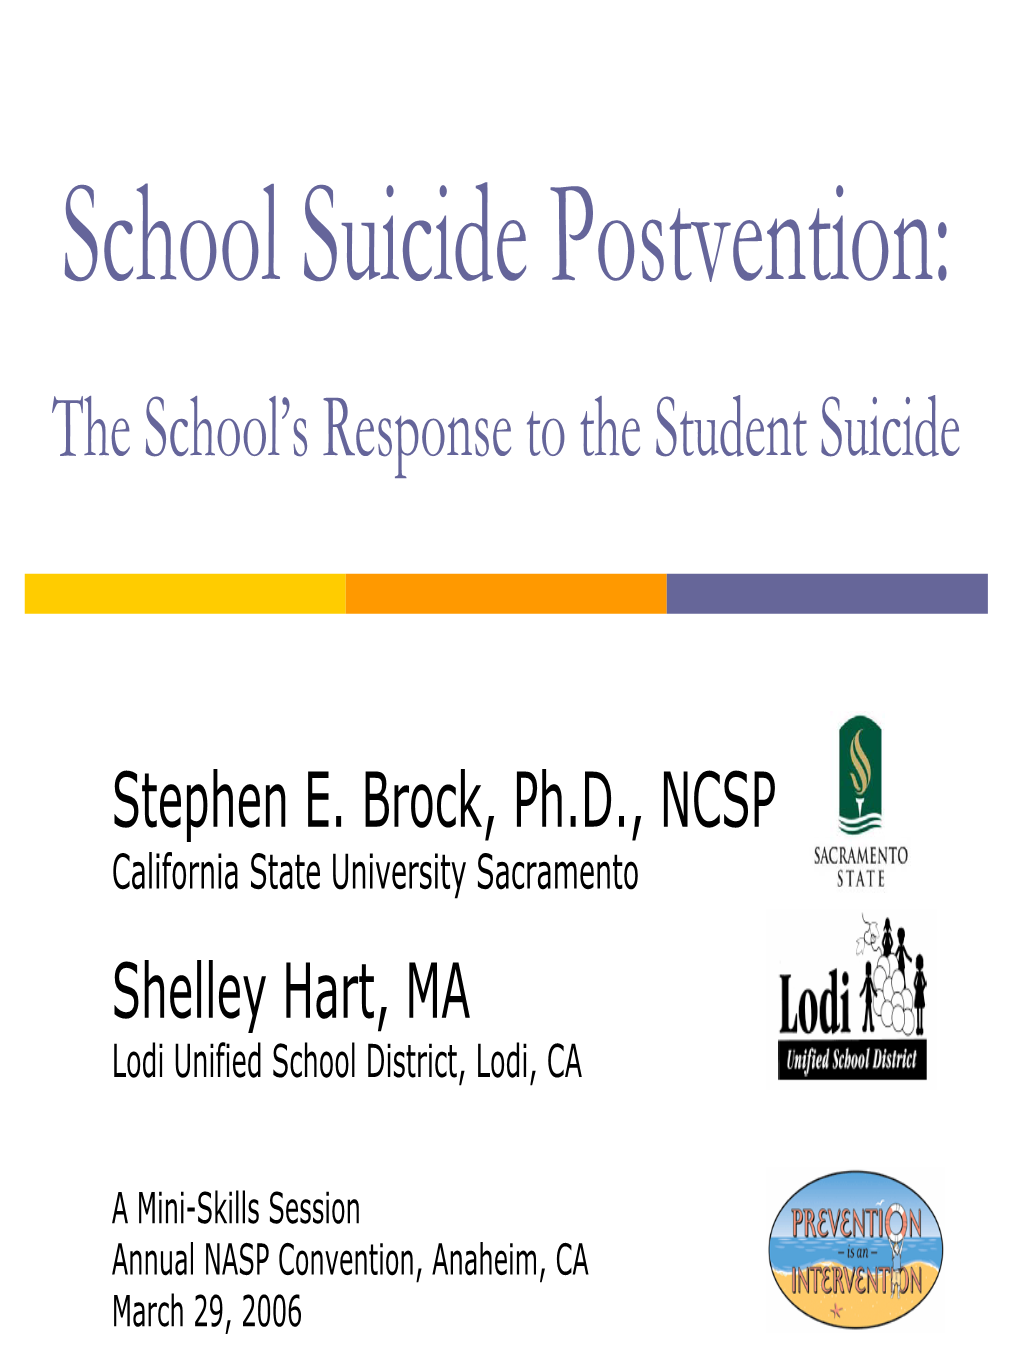 Suicide Postvention. in S